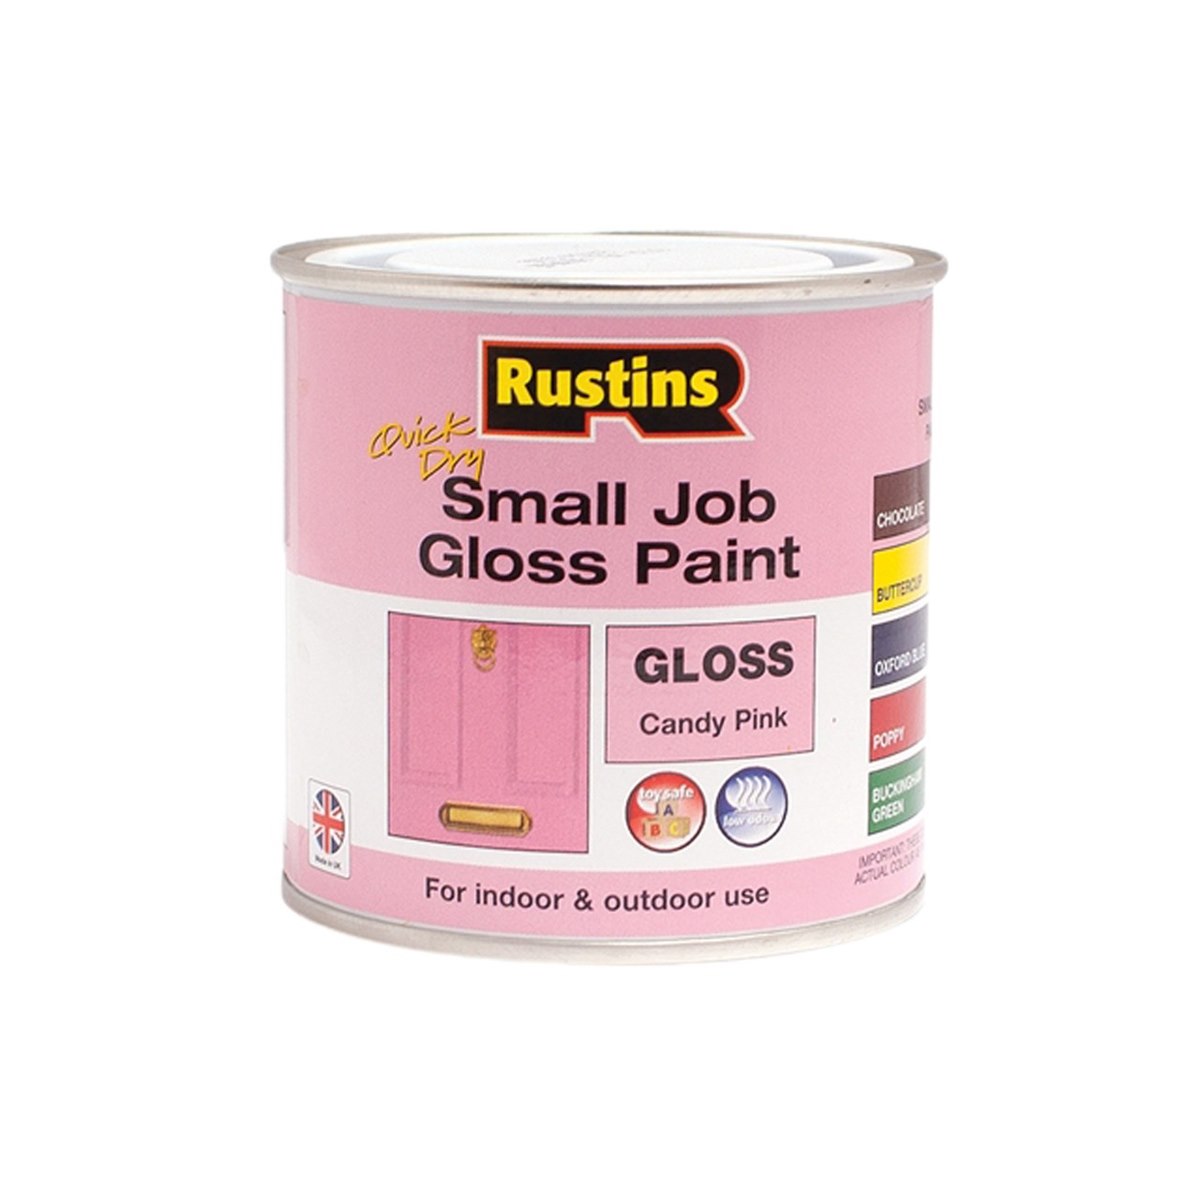 Rustins Quick Dry Small Job Gloss Paint Candy Pink 250ml